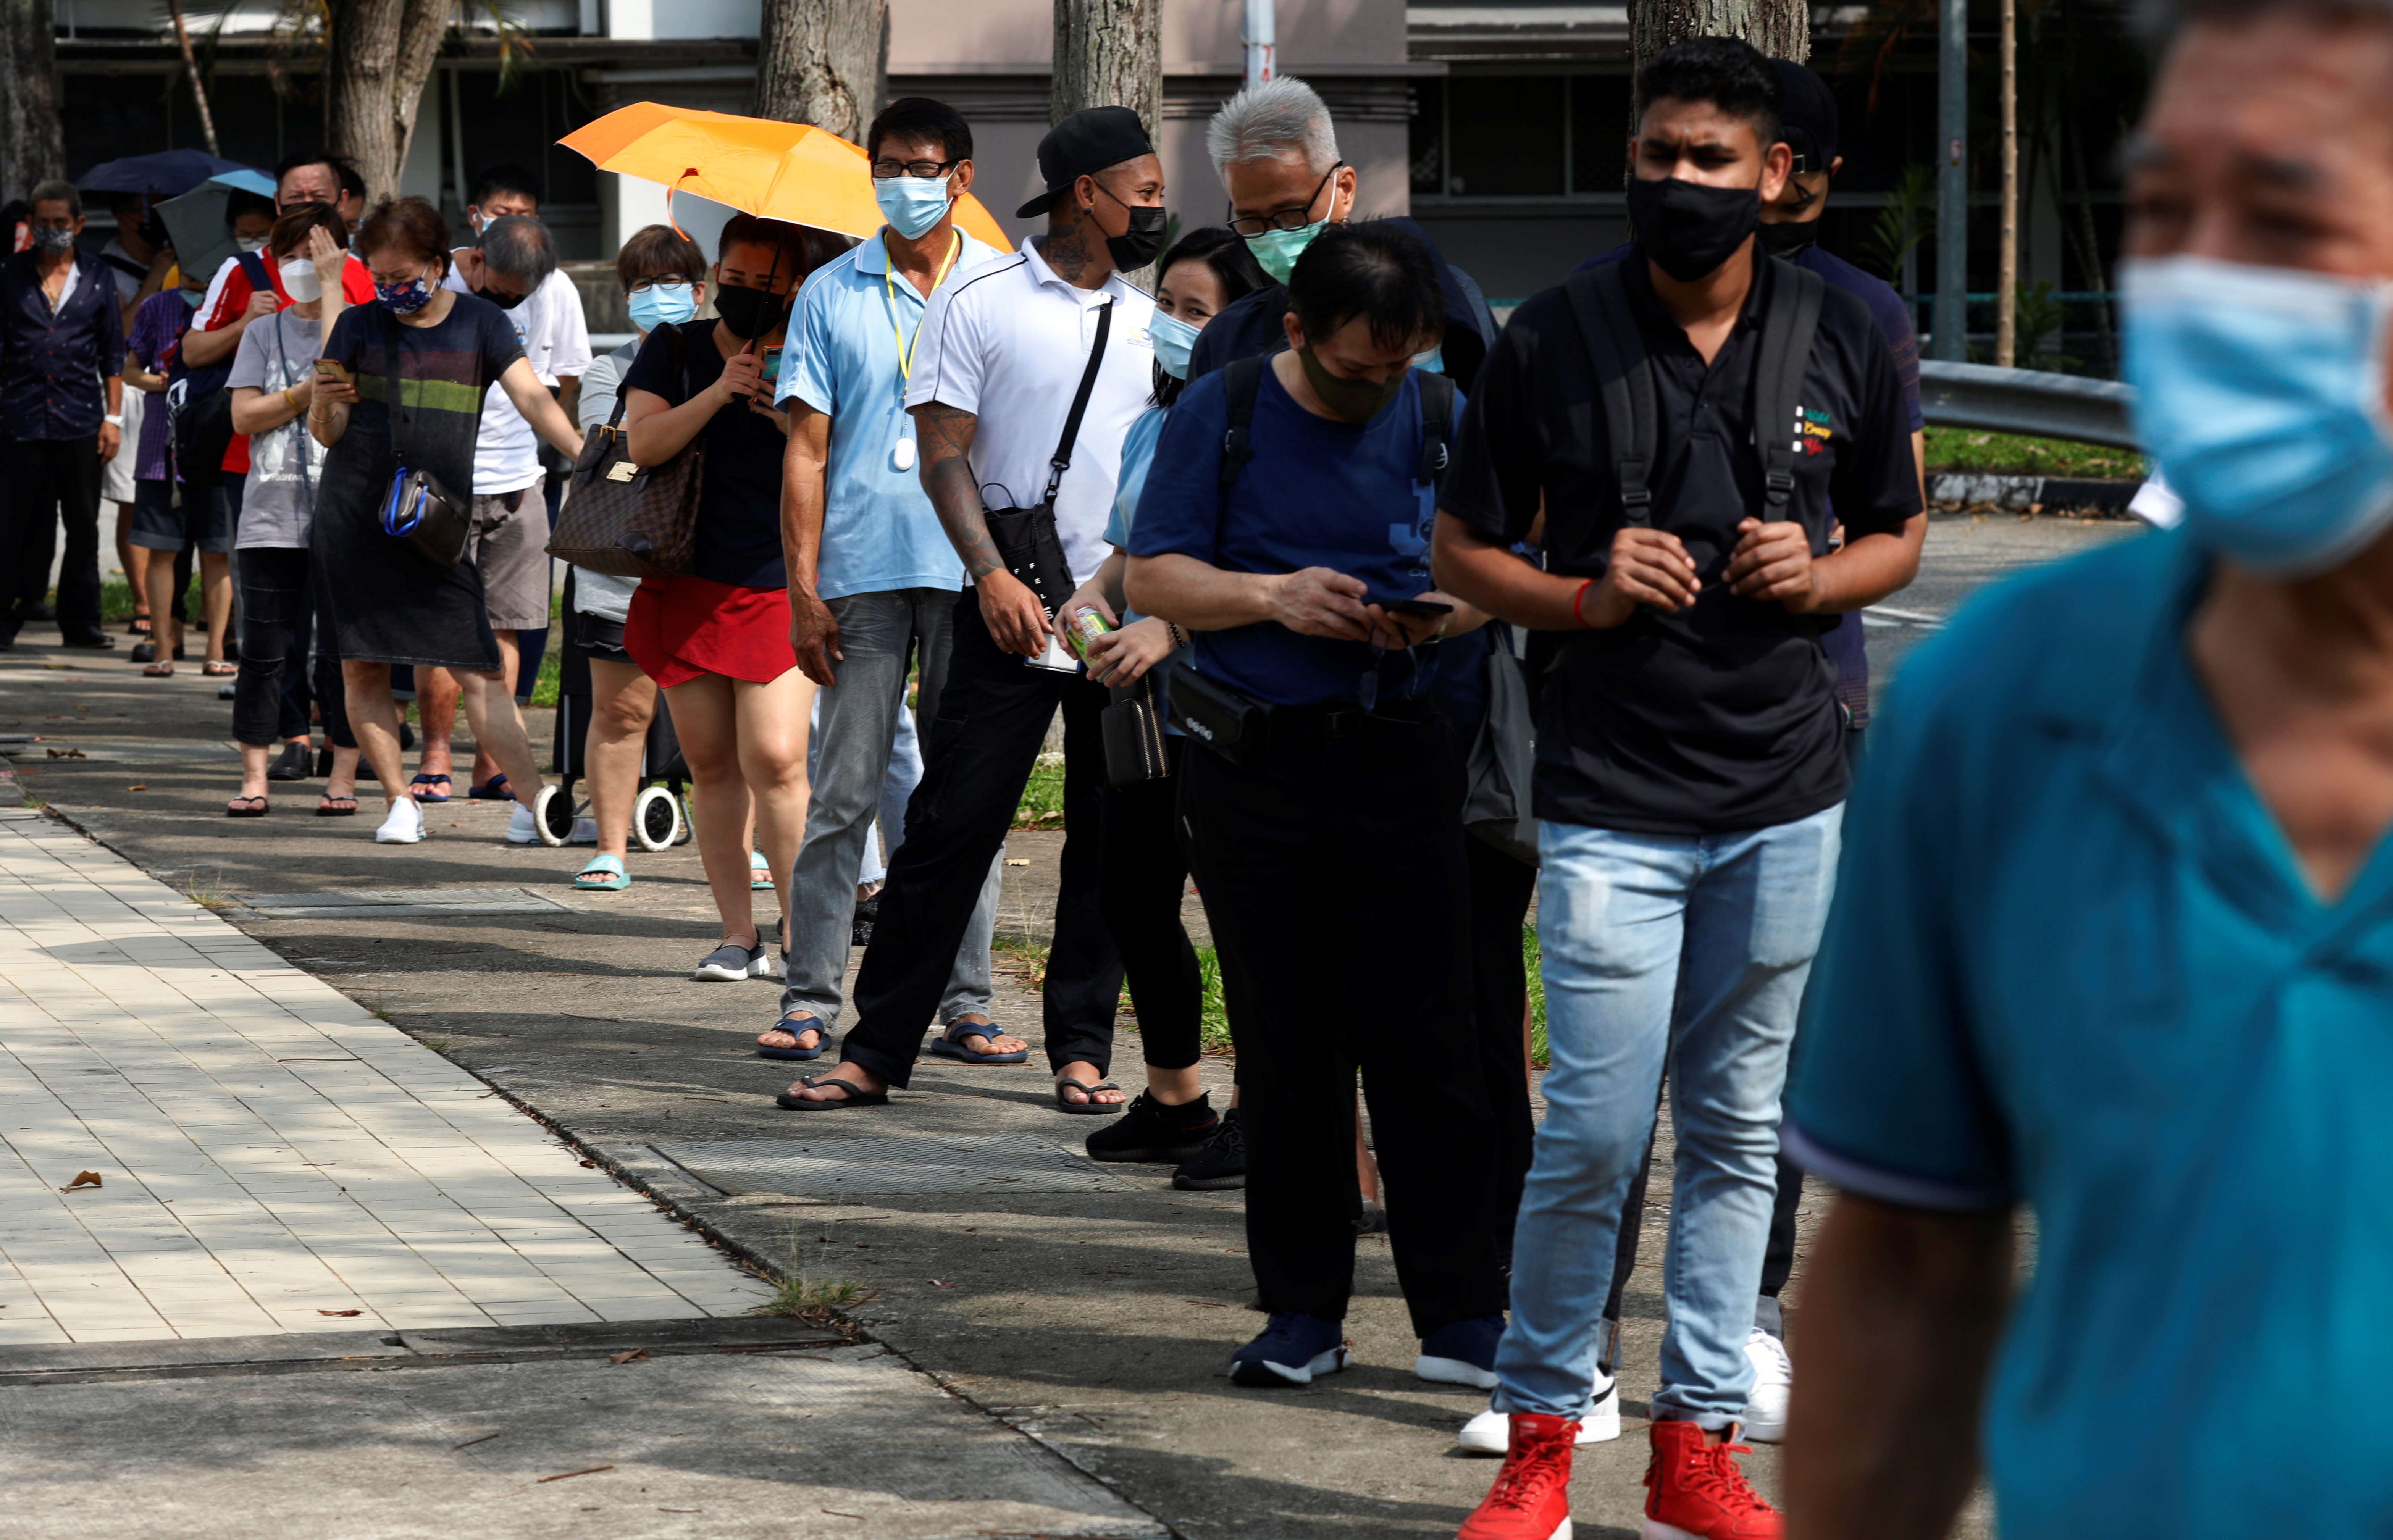 People queue up outside a quick test centre to take their coronavirus disease (COVID-19) antigen rapid tests, in Singapore September 21, 2021. REUTERS/Edgar Su